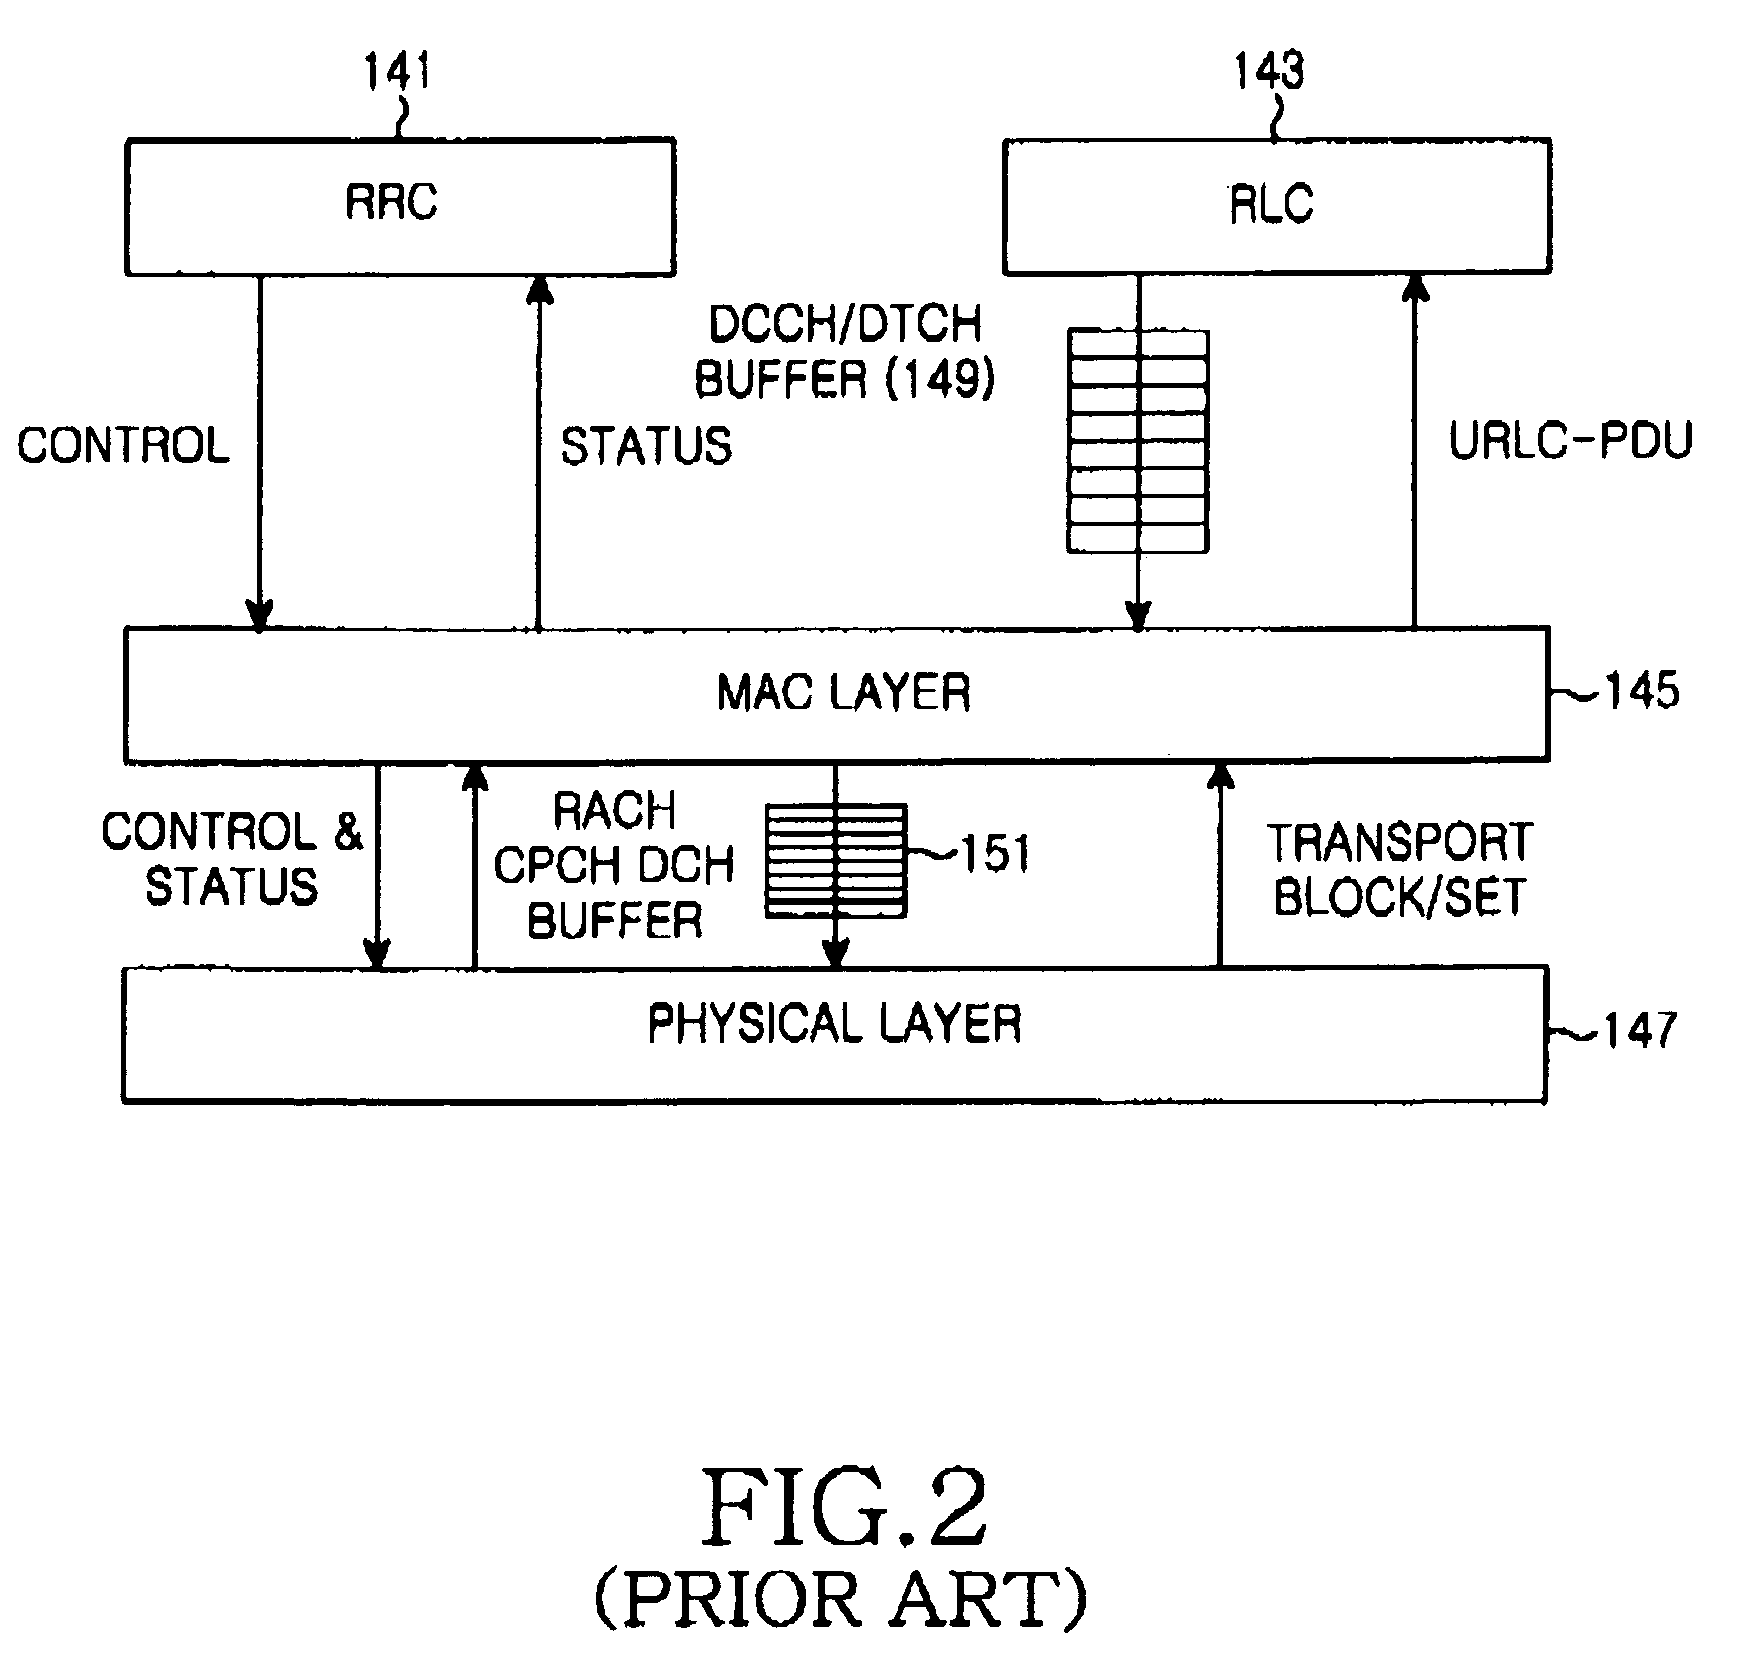 Transfer format selecting method for optimizing data transfer in WCDMA mobile communication system